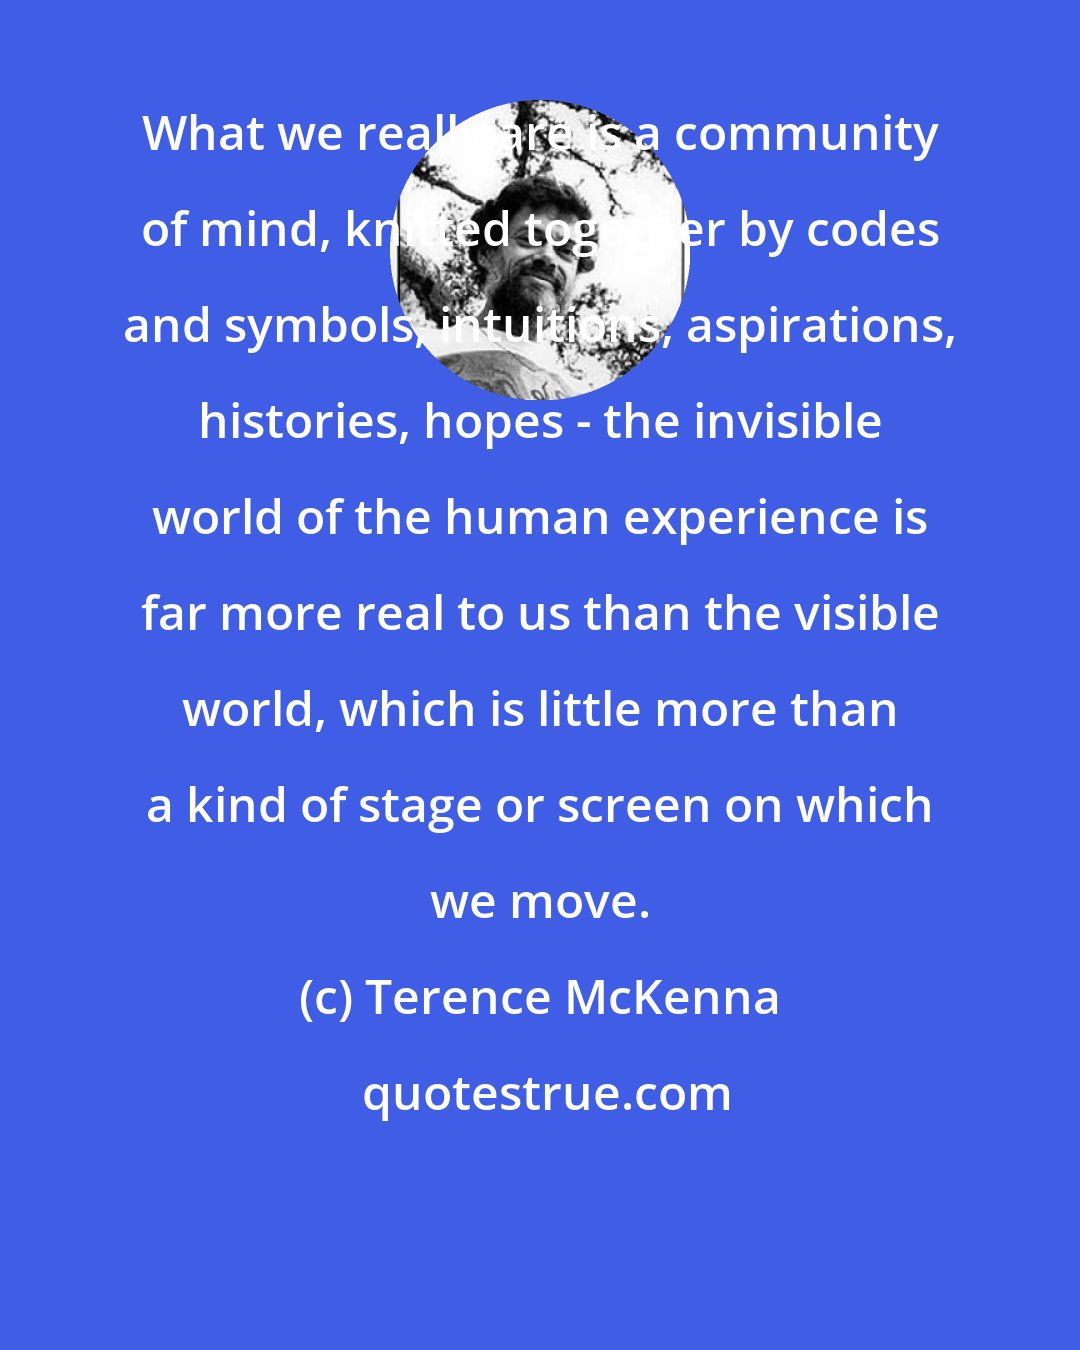 Terence McKenna: What we really are is a community of mind, knitted together by codes and symbols, intuitions, aspirations, histories, hopes - the invisible world of the human experience is far more real to us than the visible world, which is little more than a kind of stage or screen on which we move.